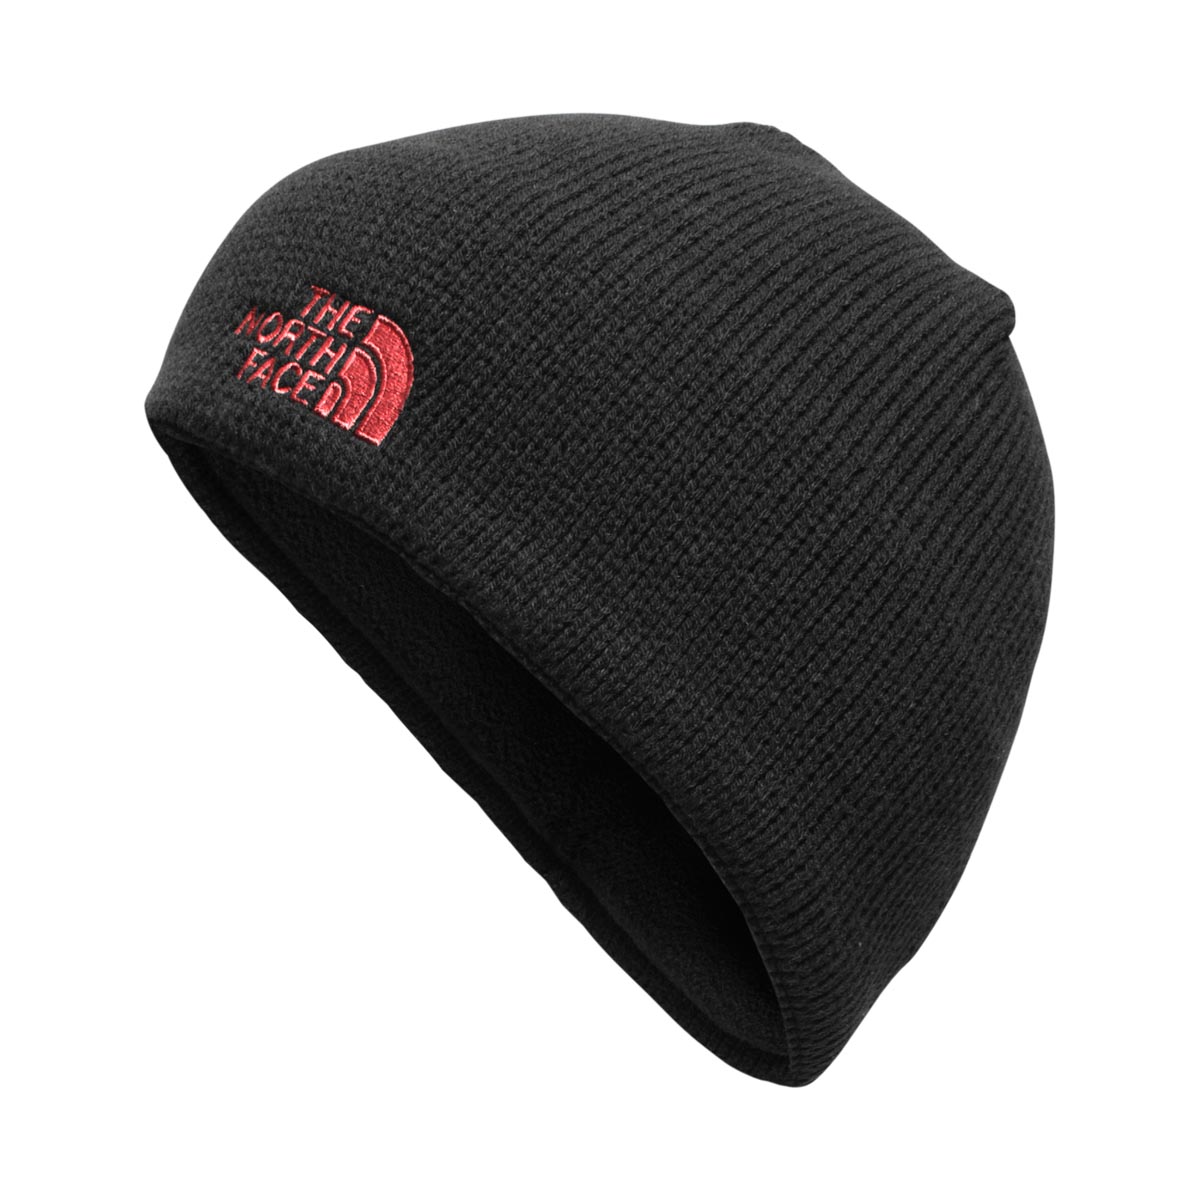 The North Face Bones Beanie Discontinued Pricing